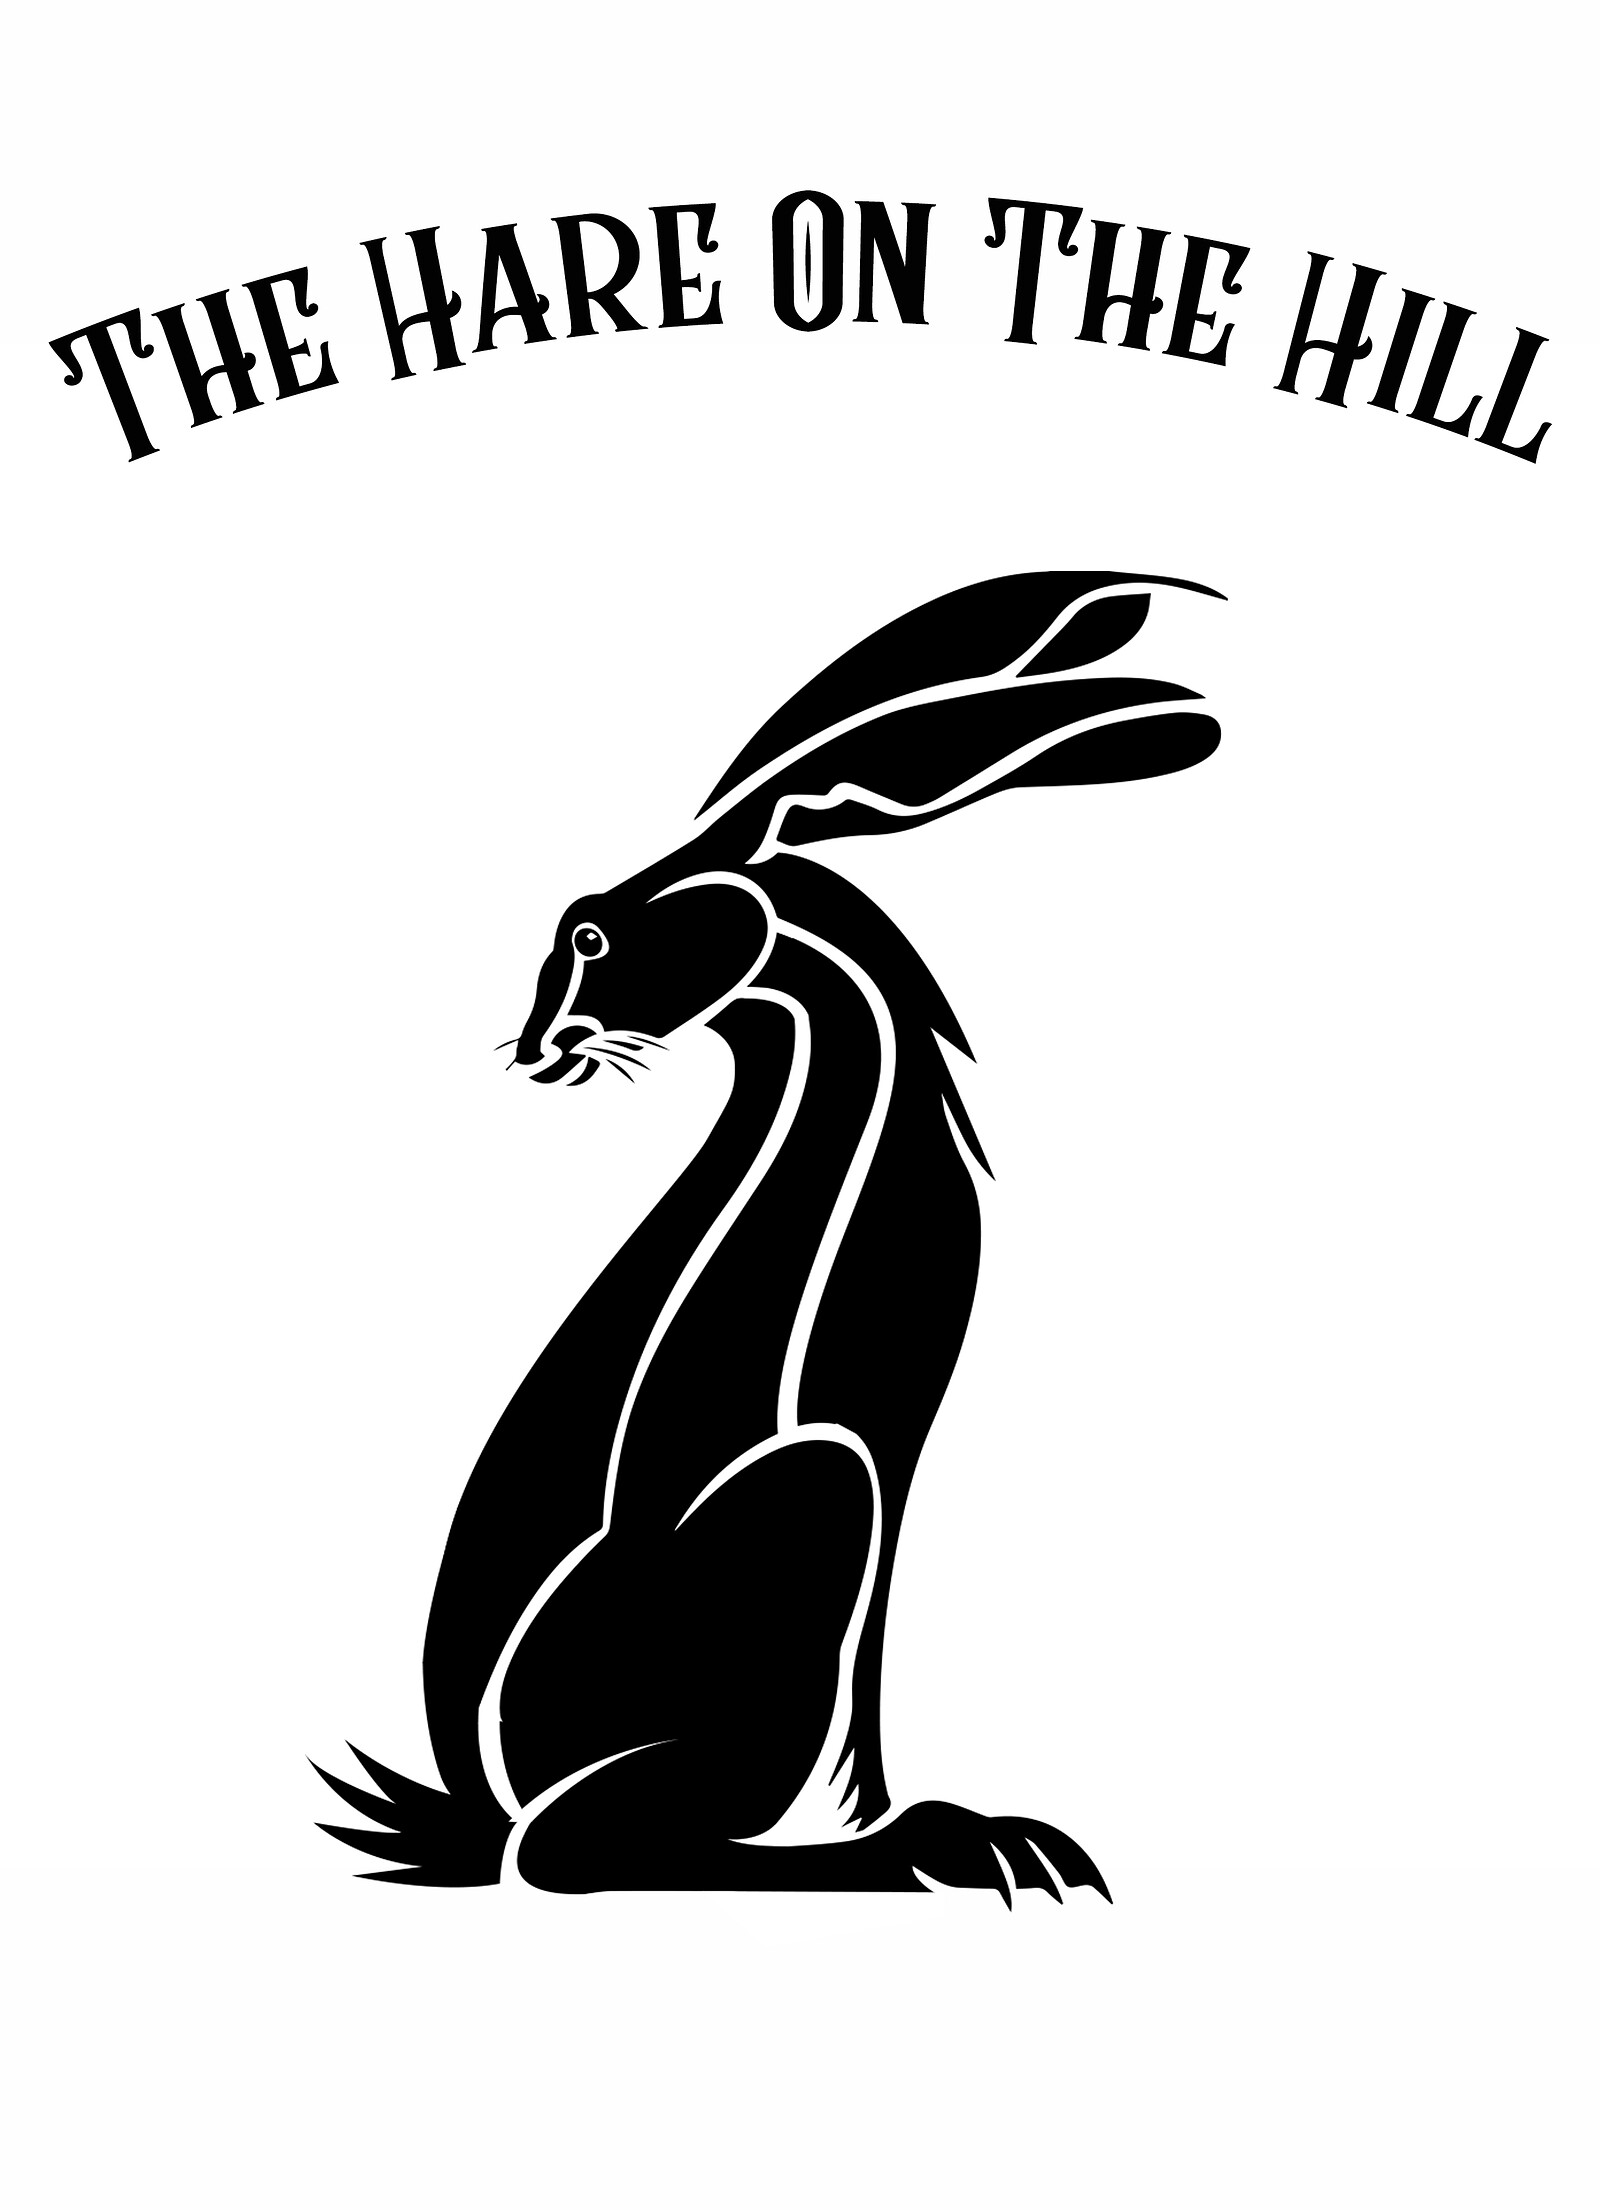 On the Decks: DJ Shake Appeal at The Hare on the Hill